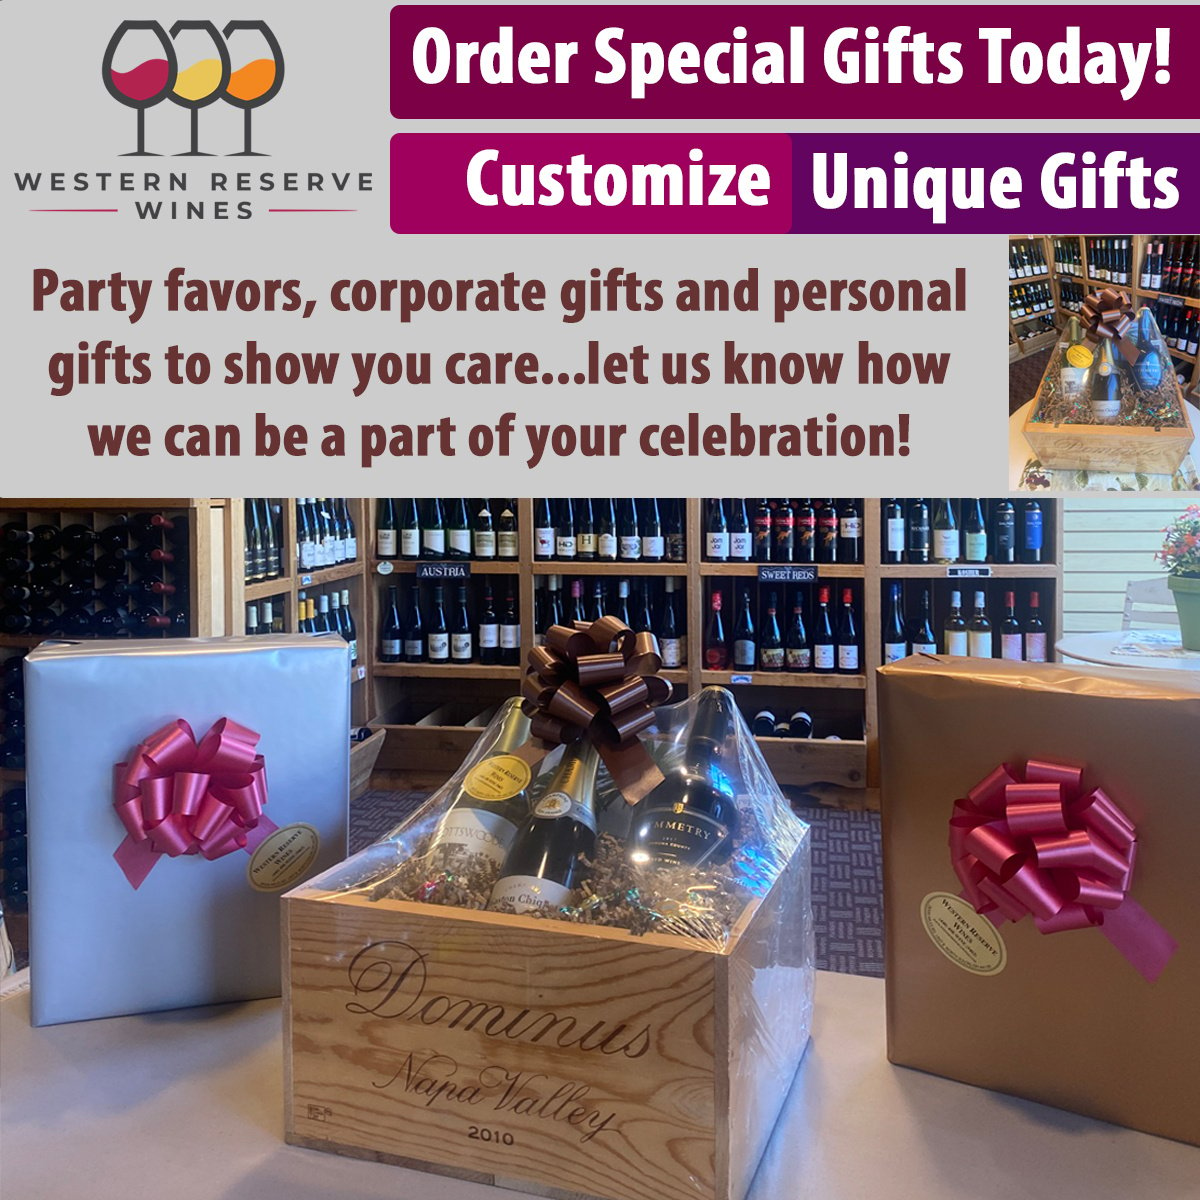 Special Custom Gifts Designed for You!